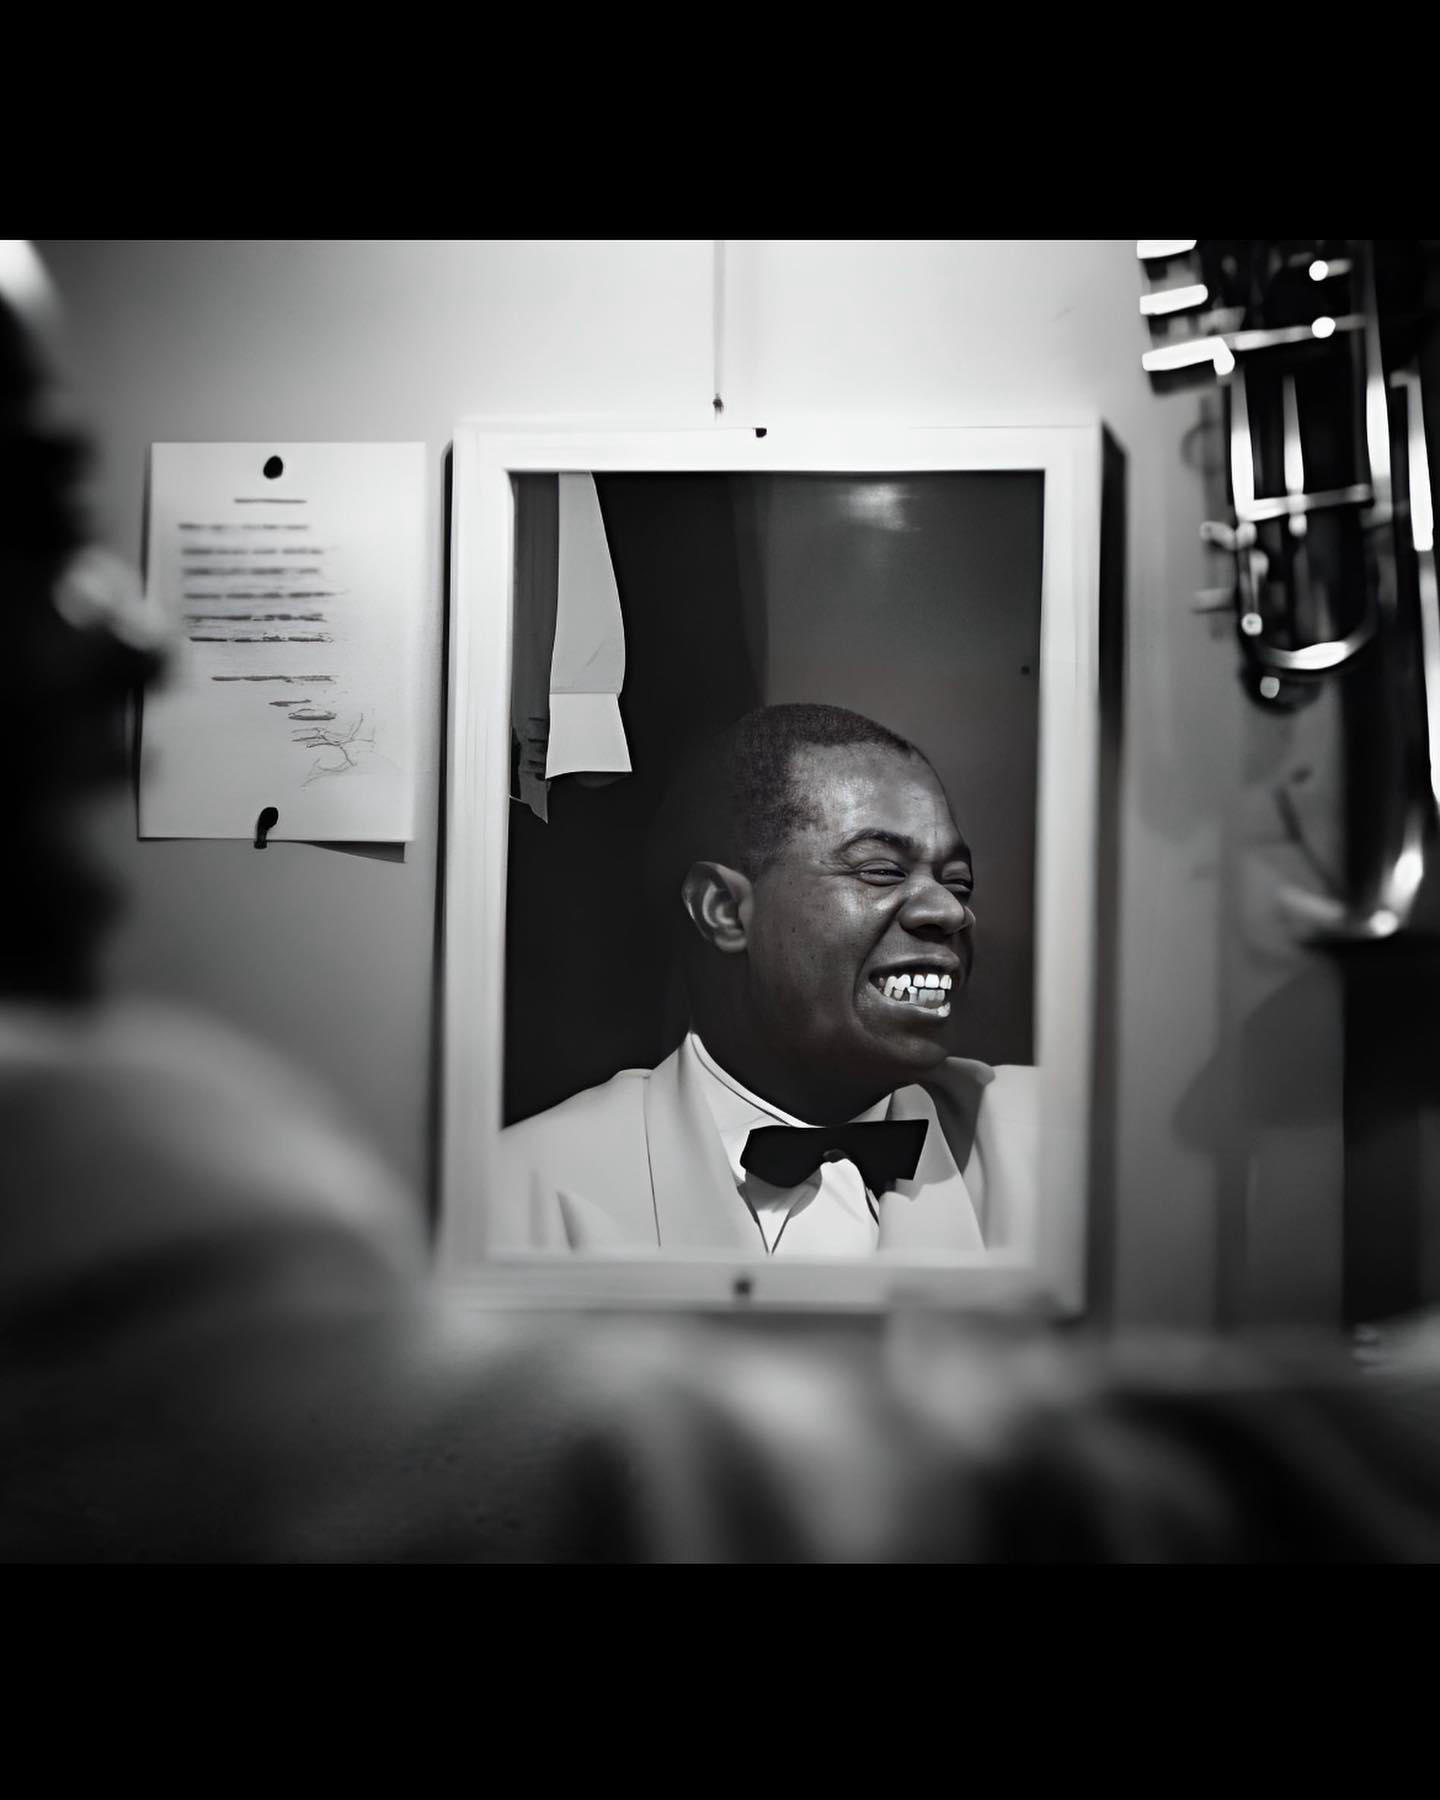 Jazz, Blues And Lounge Music - Louis Armstrong backstage, in the mirror…#louisarmstrong #jazz #jazza